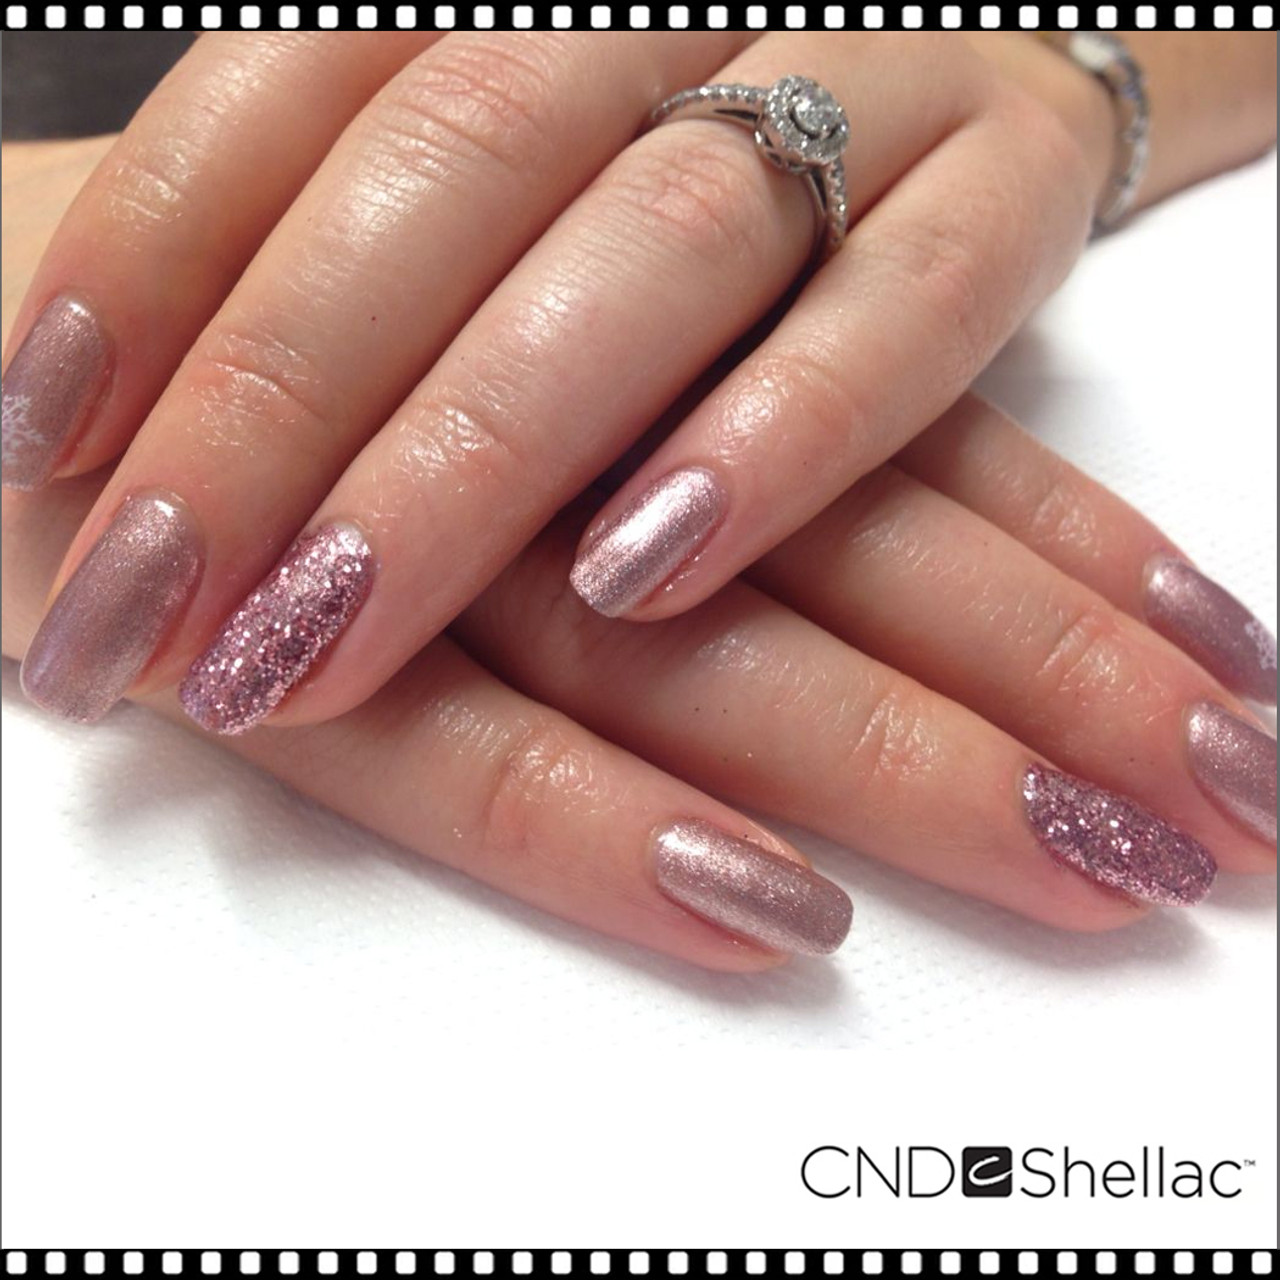 Shellac Manicure Do's And Dont's - SoZo Hair, Spa & Wigs